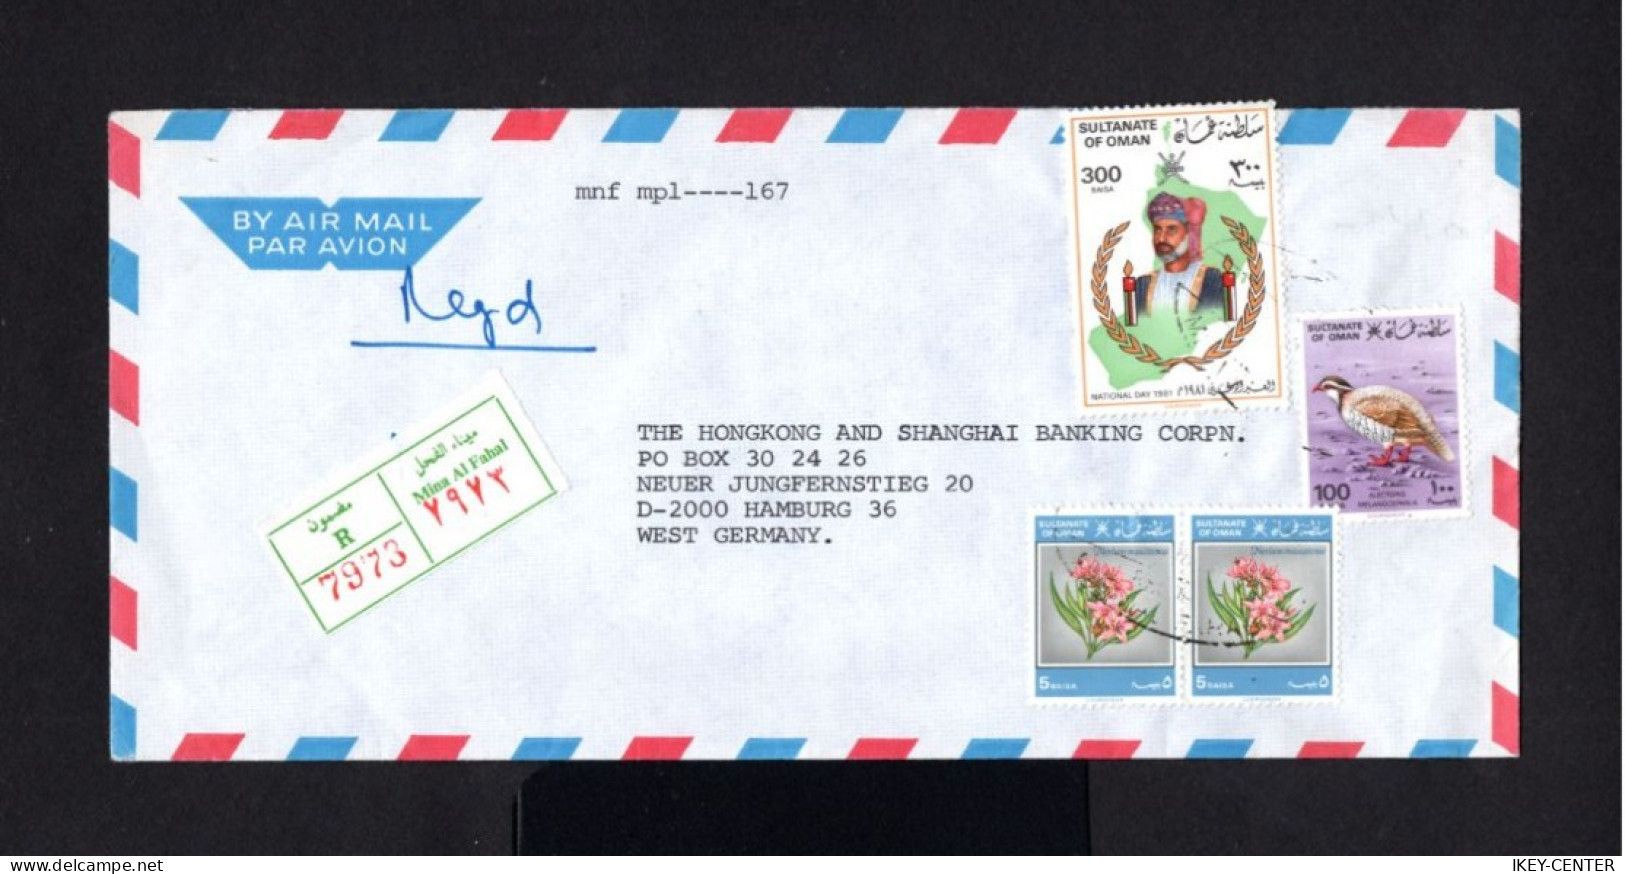 51-STATE Of OMAN-AIRMAIL REGISTERED COVER MINA AL FAHAL To HAMBURG (germany) 1981.Enveloppe RECOMMANDEE - Oman